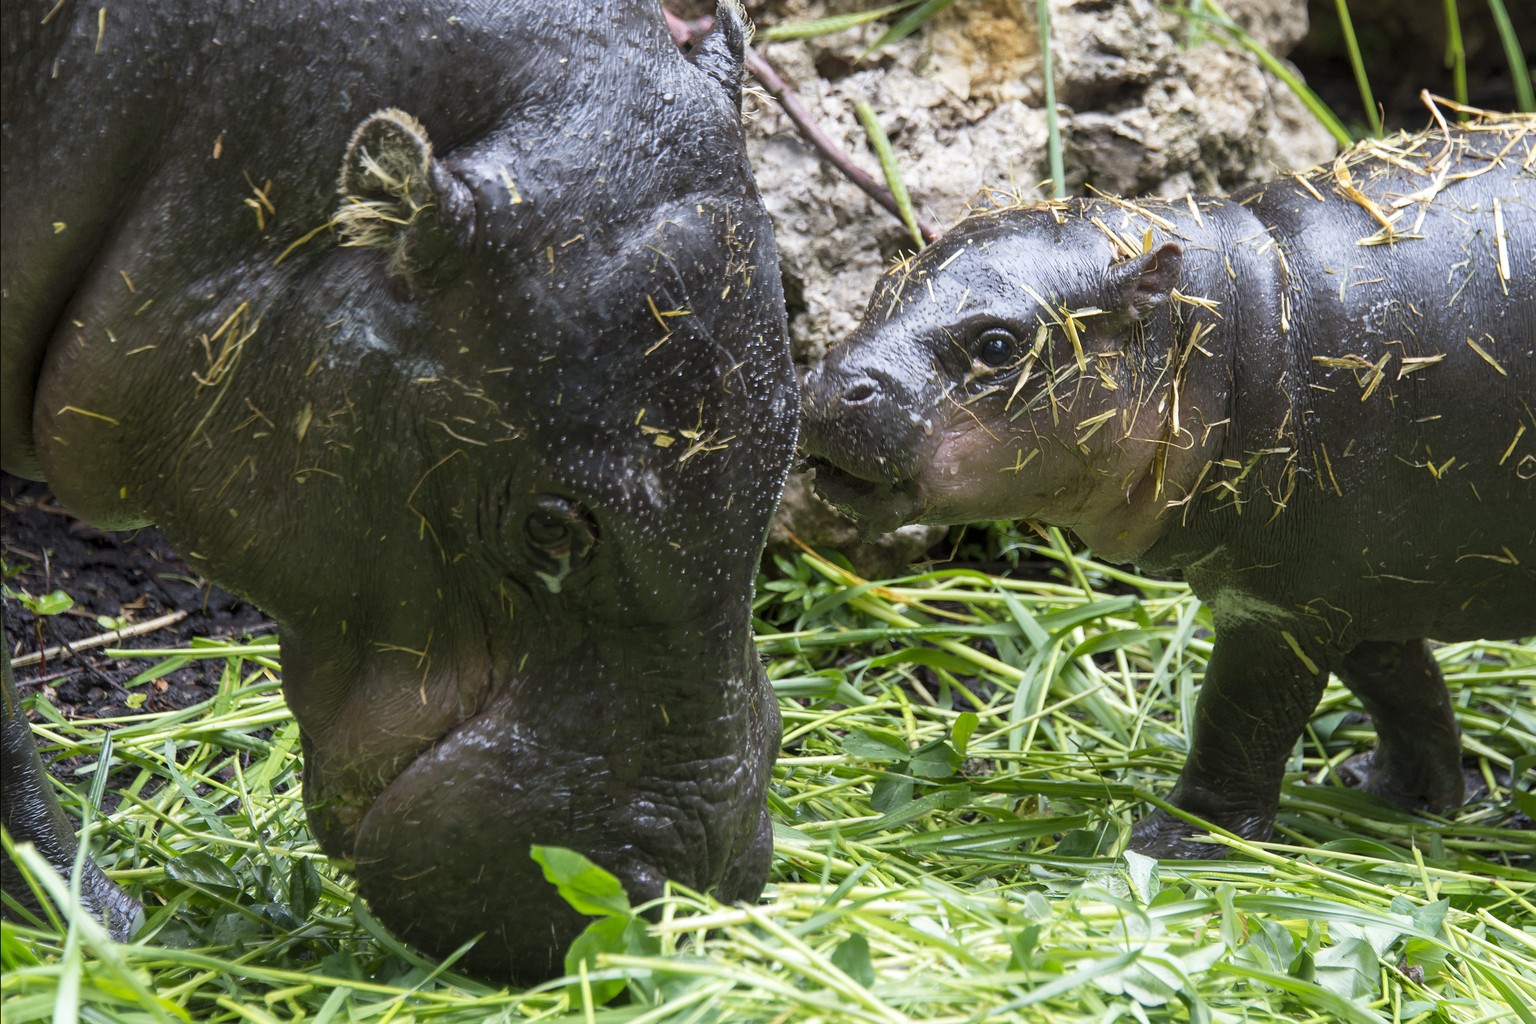 A young pygmy hippopotamus (hexaprotodon liberiensis) named Lani lingers in the zoo with mother Ashaki in Basel, Switzerland on Wednesday, May 14, 2014. (KEYSTONE/Georgios Kefalas)